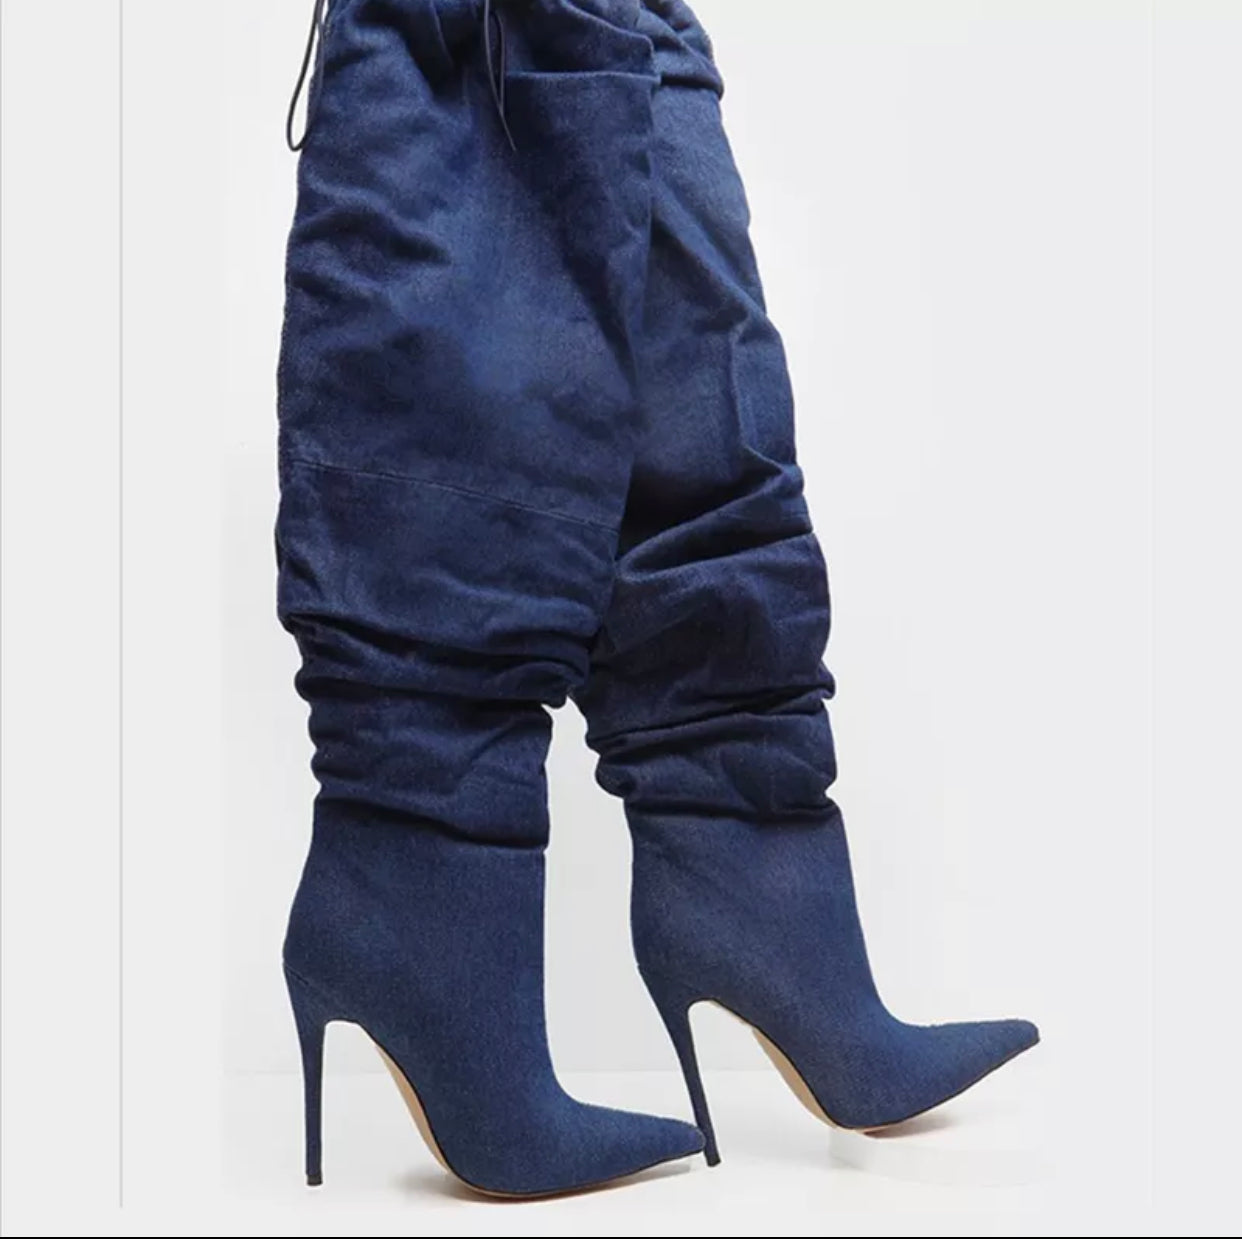 Blue Denim Jeans Lace Up High Top Womens Military Combat Boots Shoes